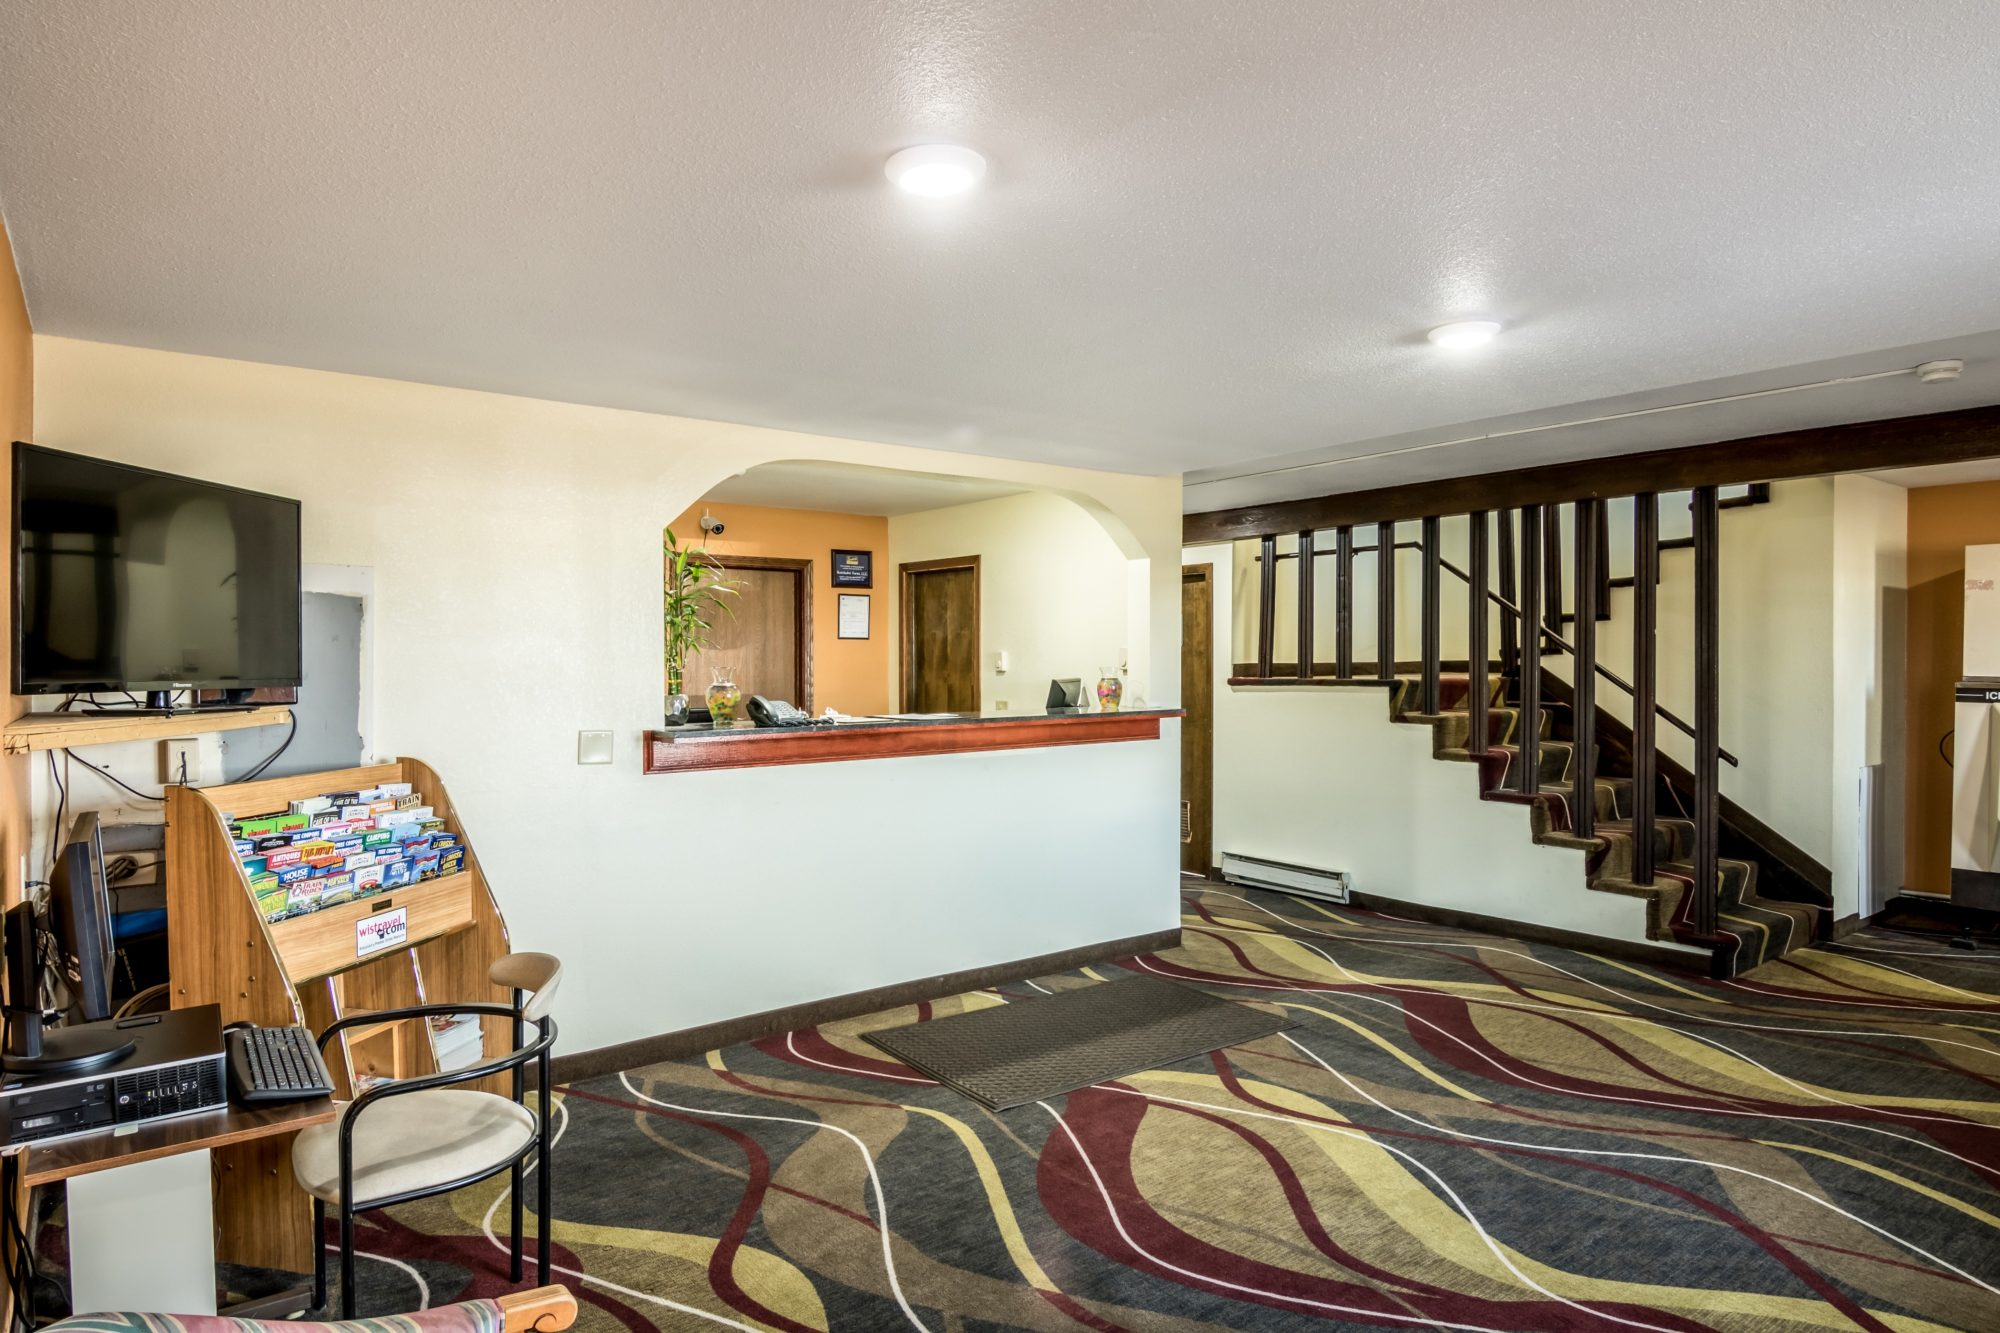 Guest check in desk, guest information leaflet stand, flat screen TV, stairs to next floor, carpet flooring